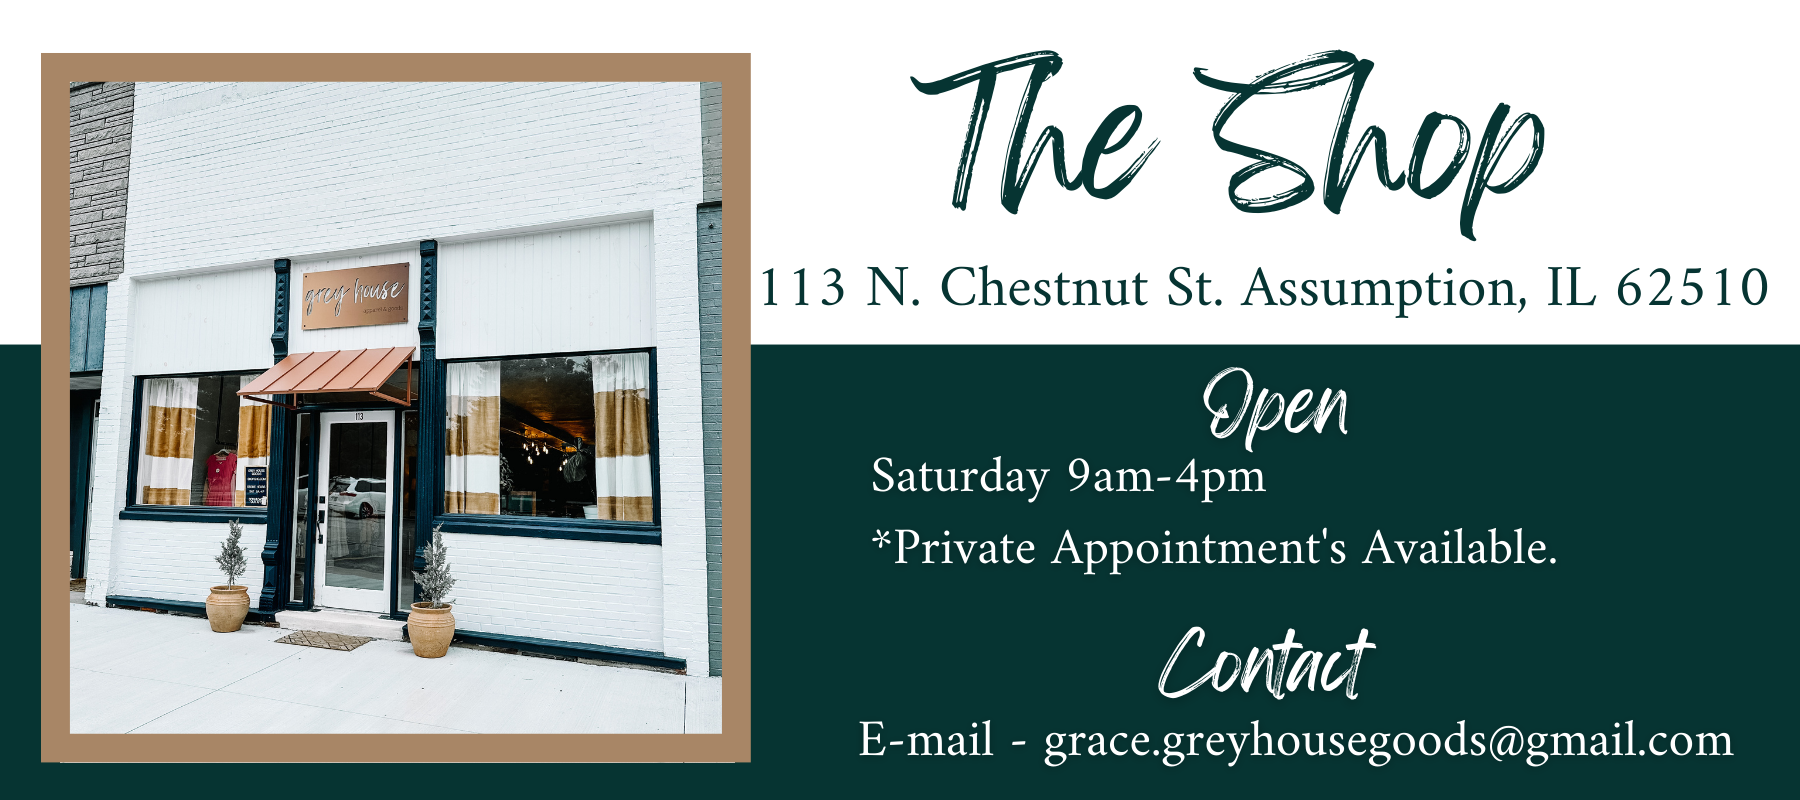 Picture of store hours and address. Saturday 9am-4pm. 113 N. Chestnut St. Assumption, IL 62510